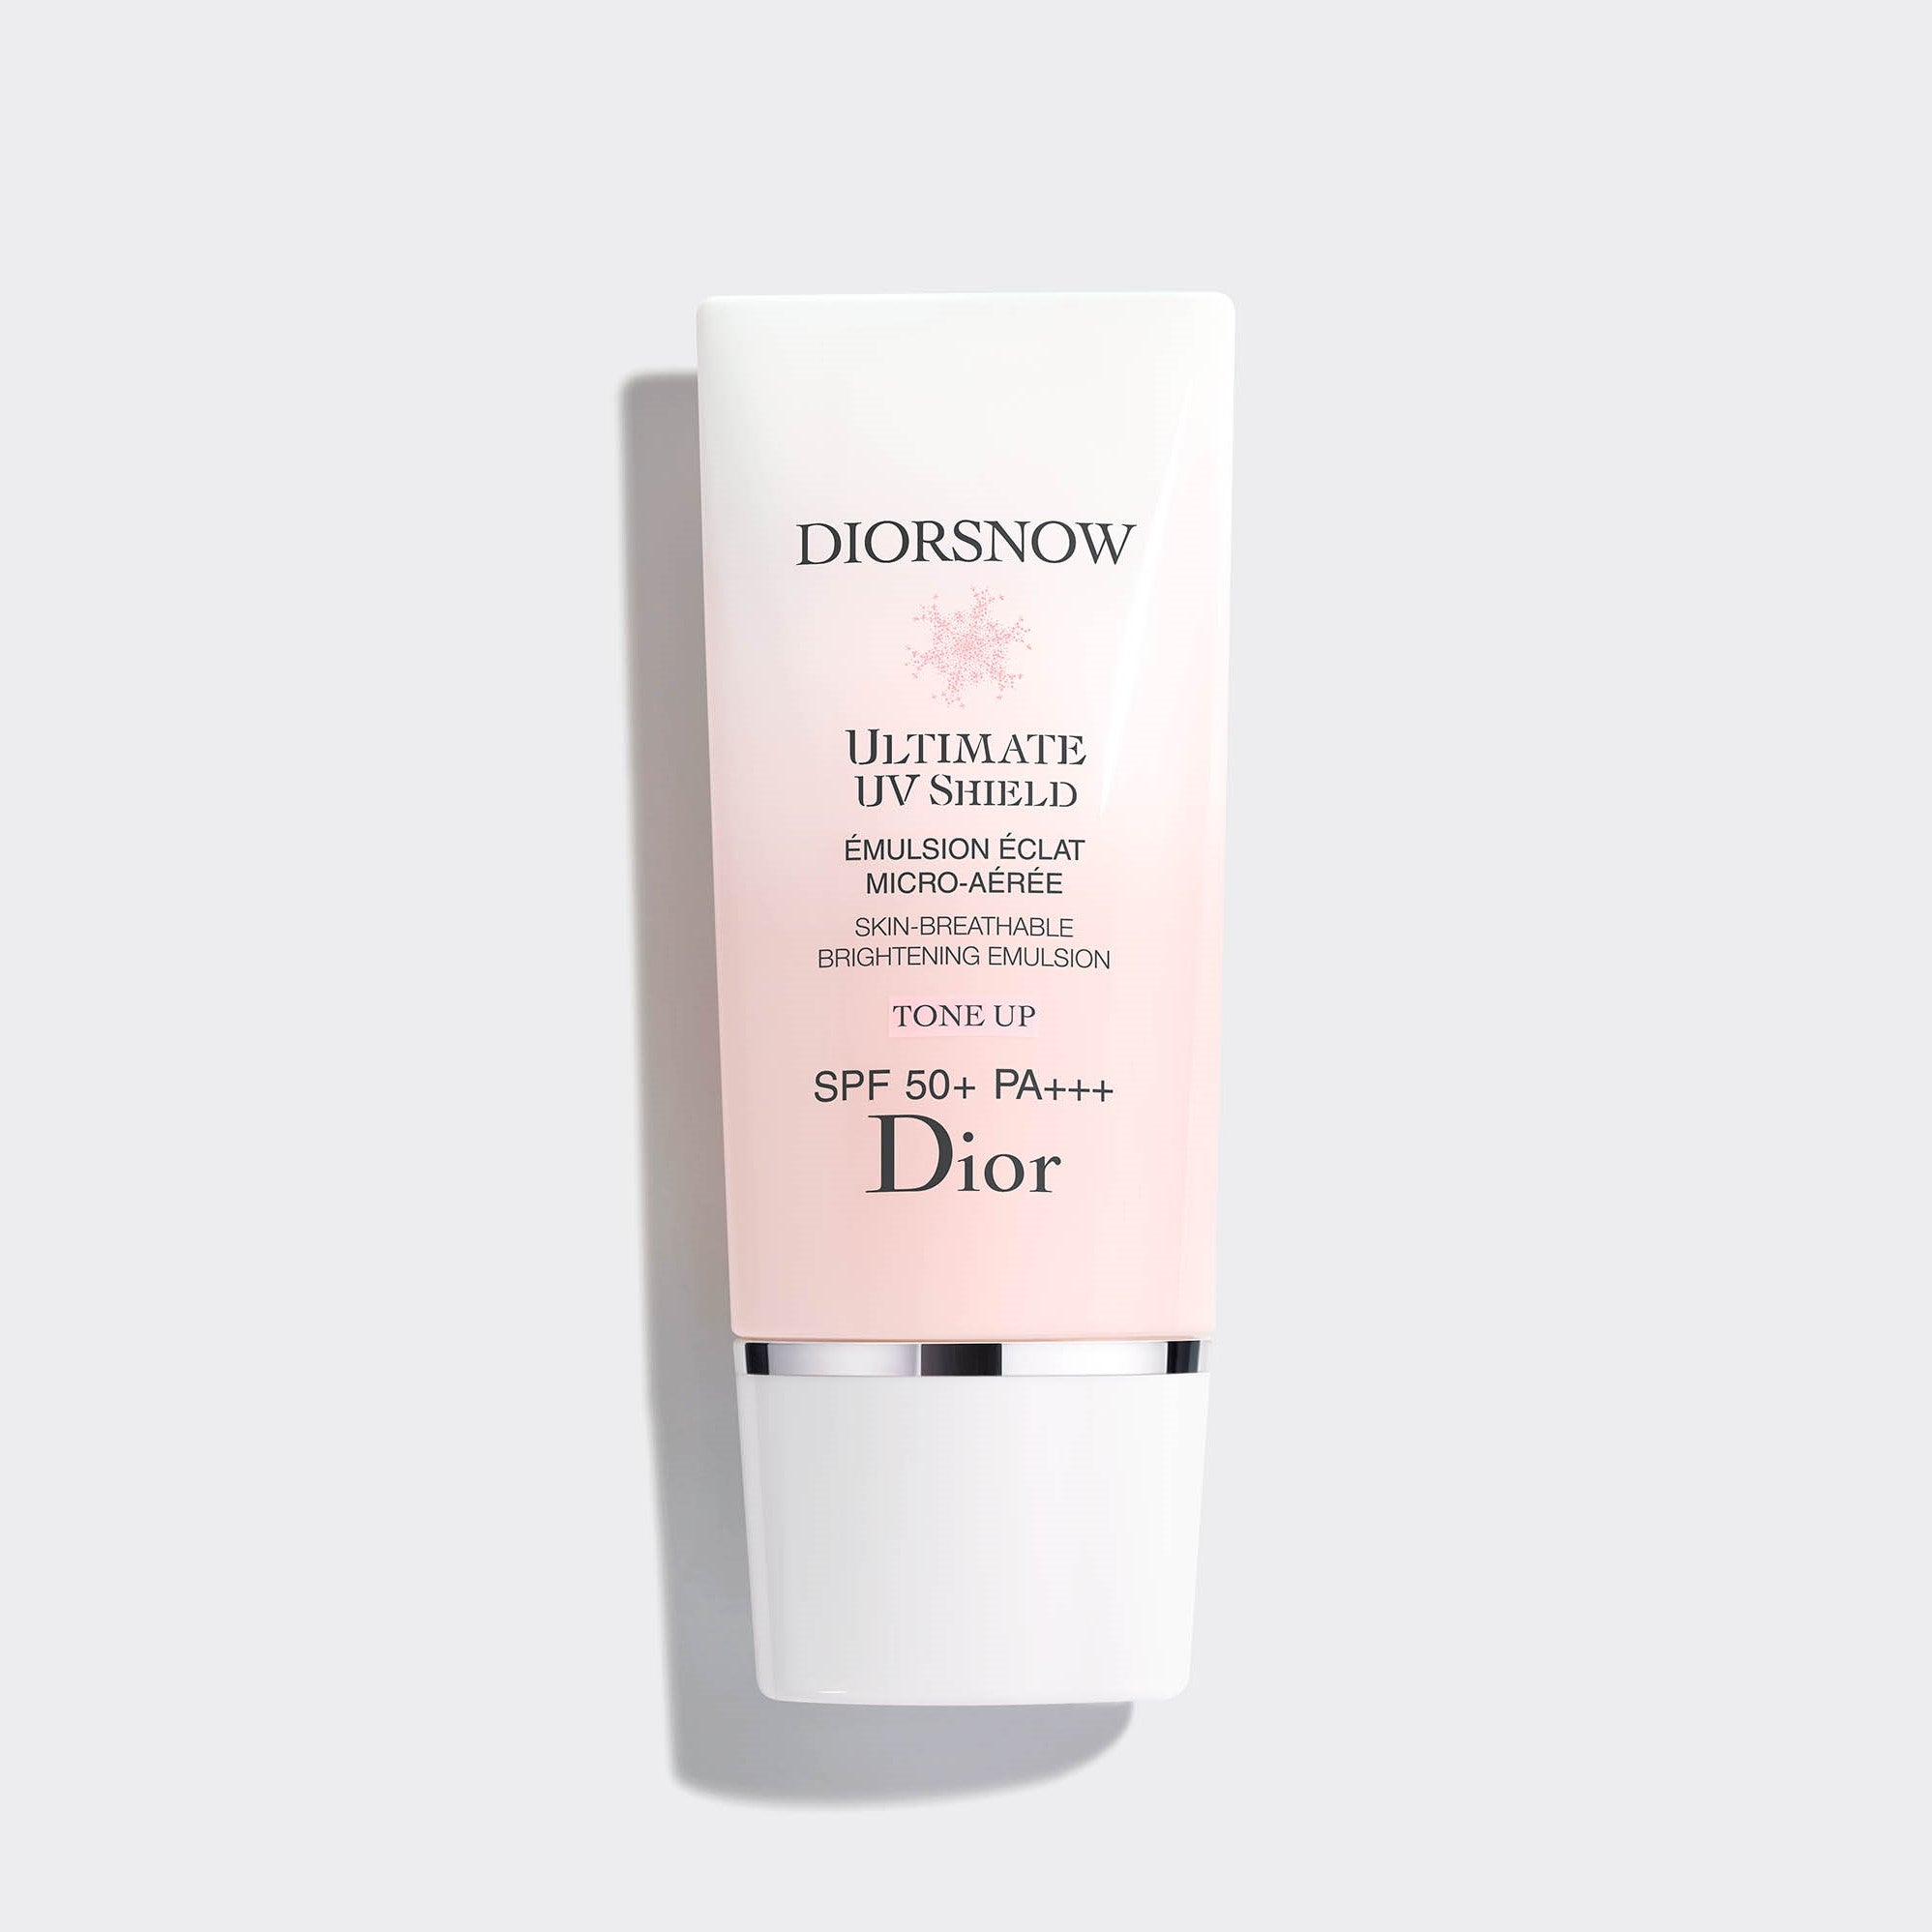 DIORSNOW ULTIMATE UV SHIELD TONE UP (SPF 50+ PA+++) ~ Skin-Breathable Brightening Emulsion - Tinted Skincare - SPF 50+ PA+++